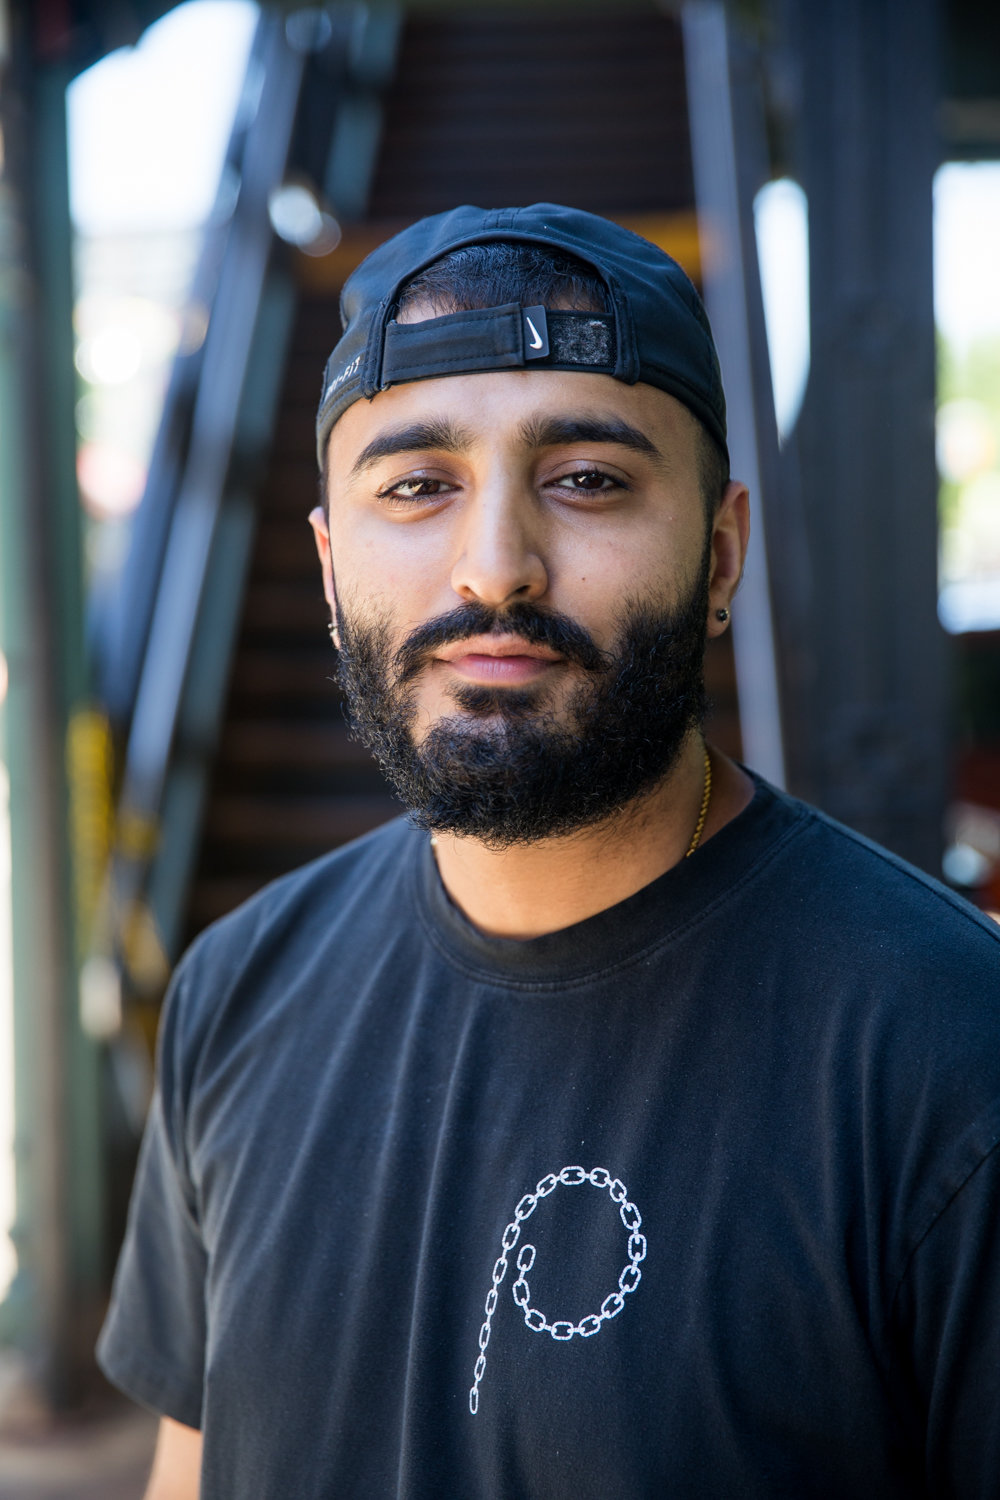 Pardeep Singh Deol , owner of The Last Stop, was on board with the ‘friendly fridge’ idea from the beginning. In the weeks since it’s been stationed outside his 5977 Broadway eatery, the fridge has been full of food available to those who need it for free.